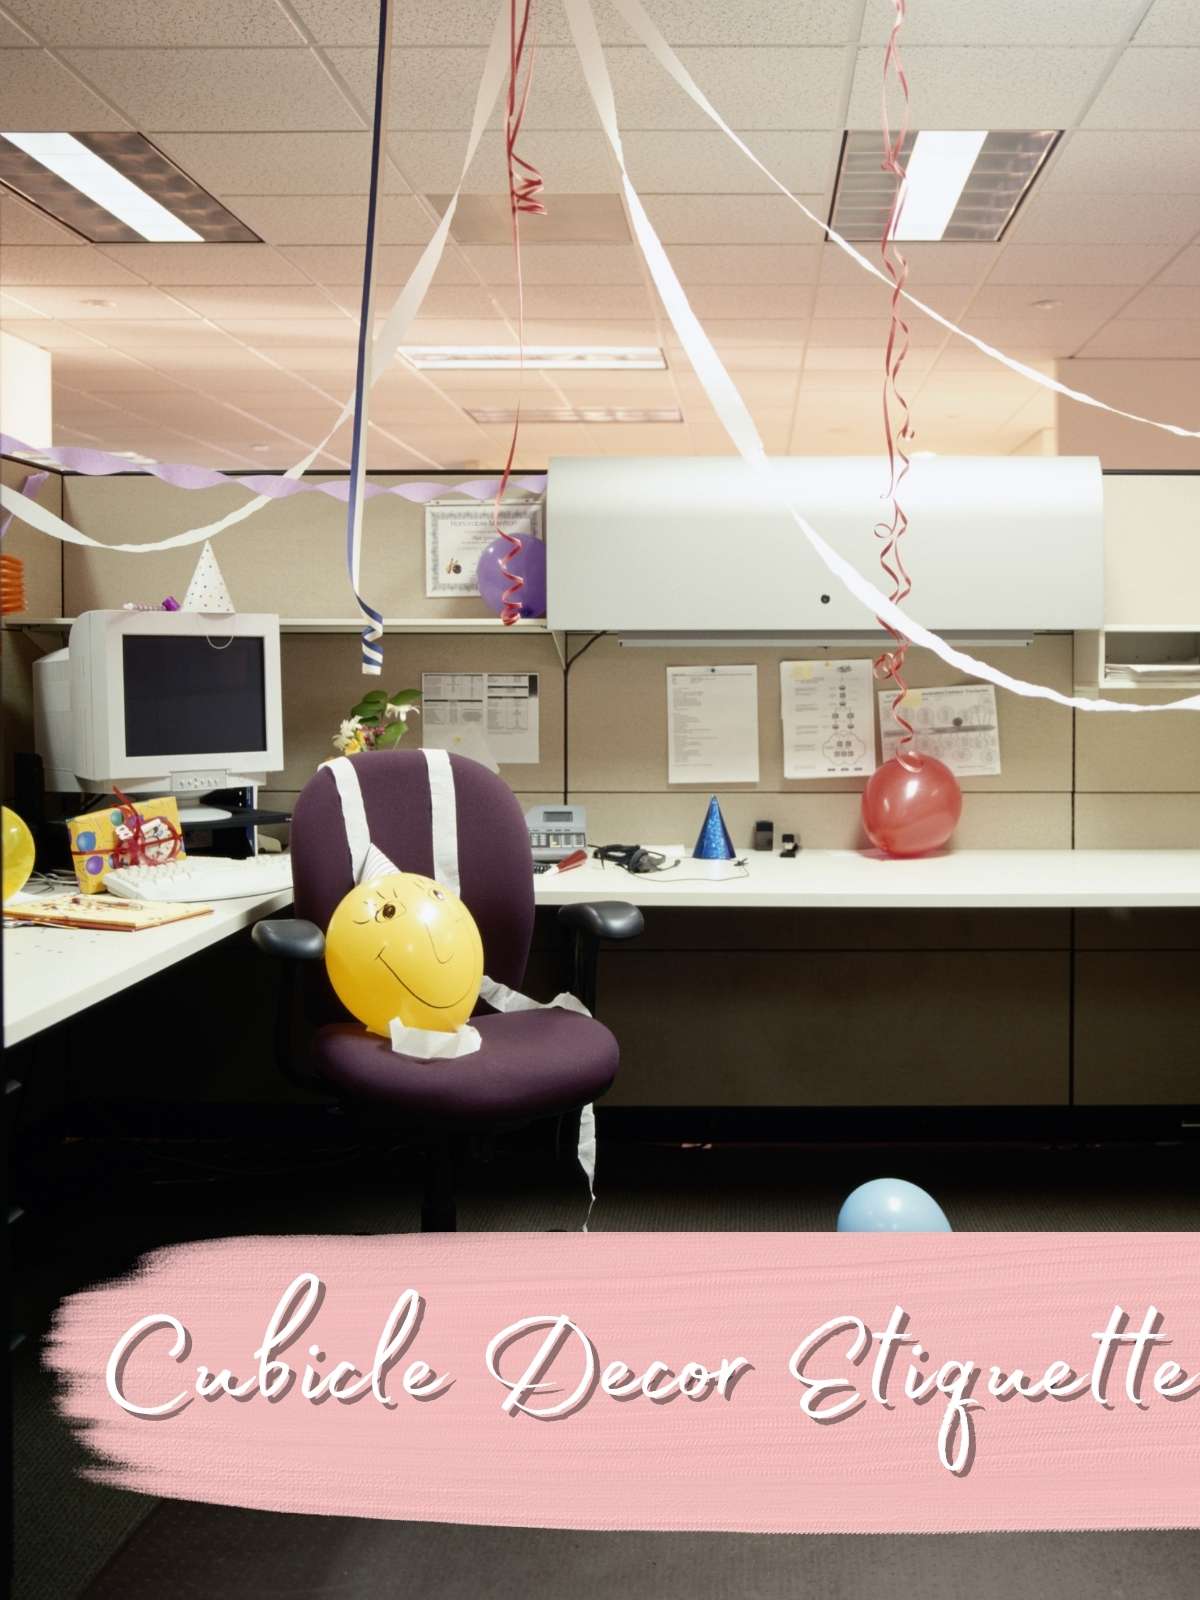 Cubicle decor etiquette. Photo of cubicle with streamers. 